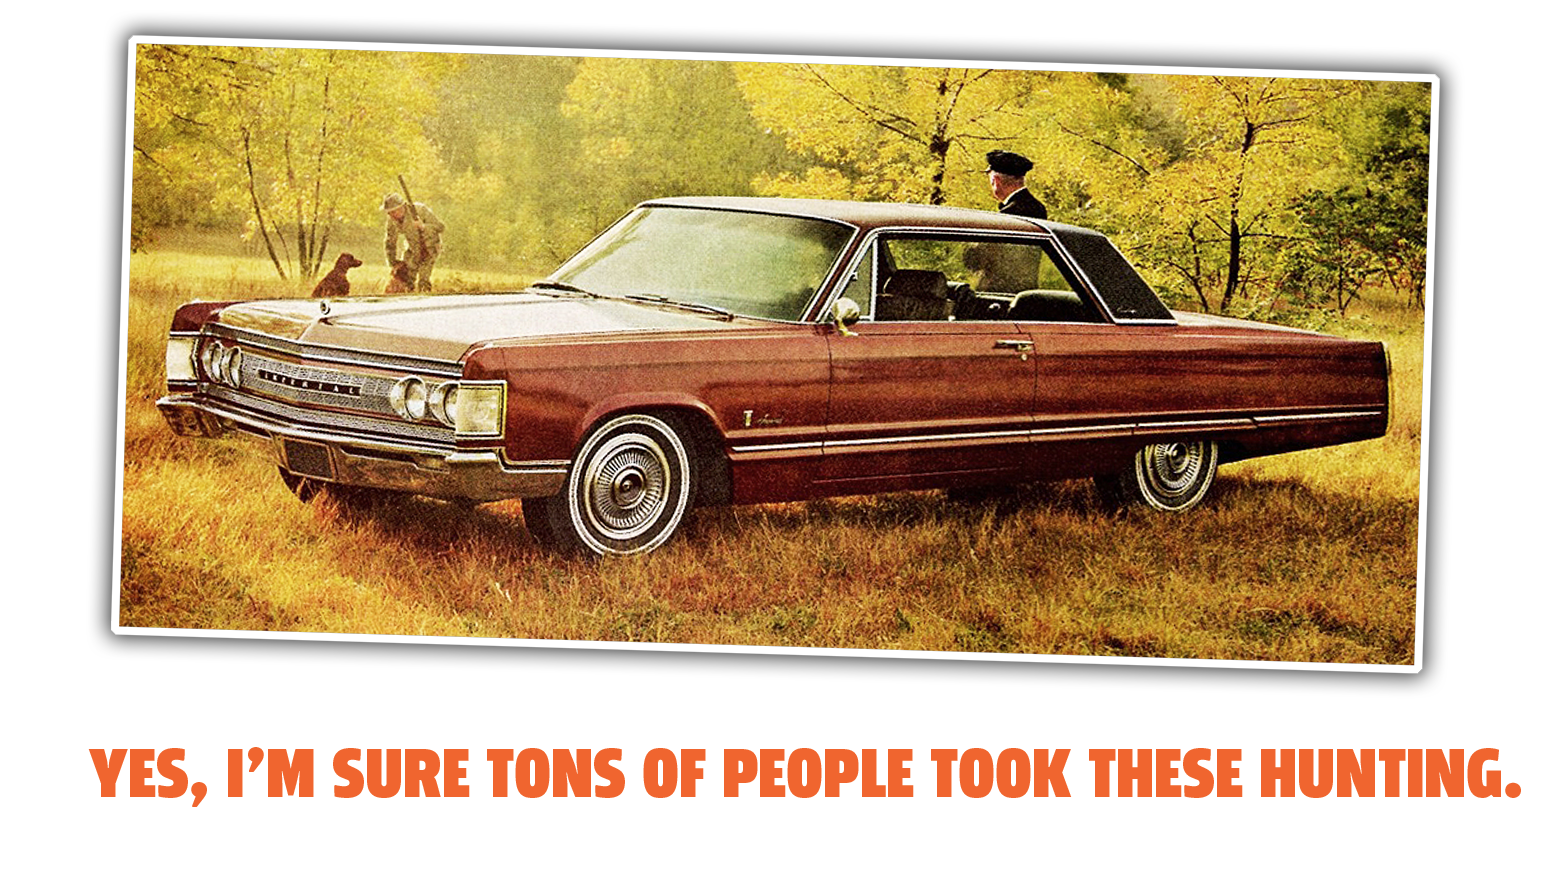 Chrysler Once Offered The Classiest And Least Expected Option For A Coupé